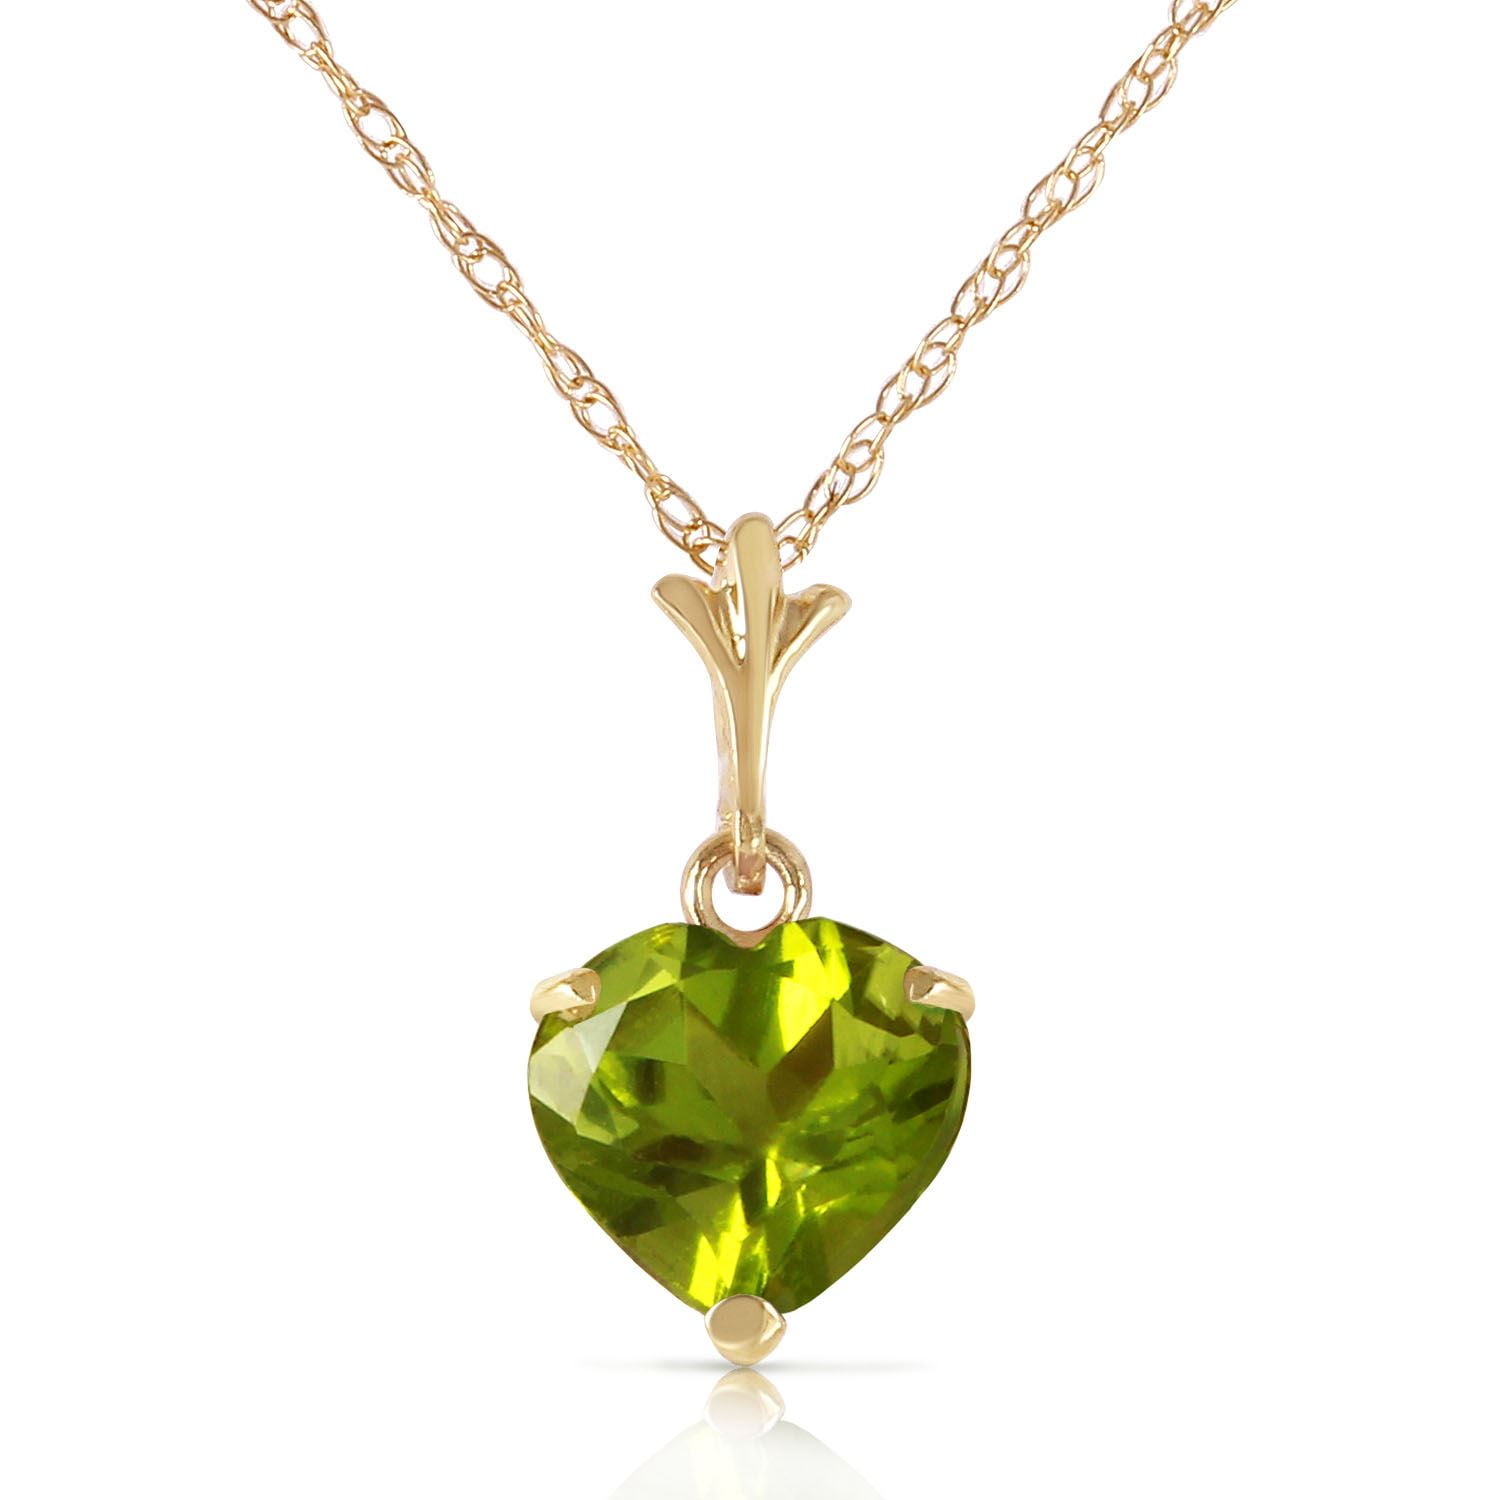 ALARRI 3.25 CTW 14K Solid Gold Necklace Checkerboard Cut Green Amethyst with 20 Inch Chain Length